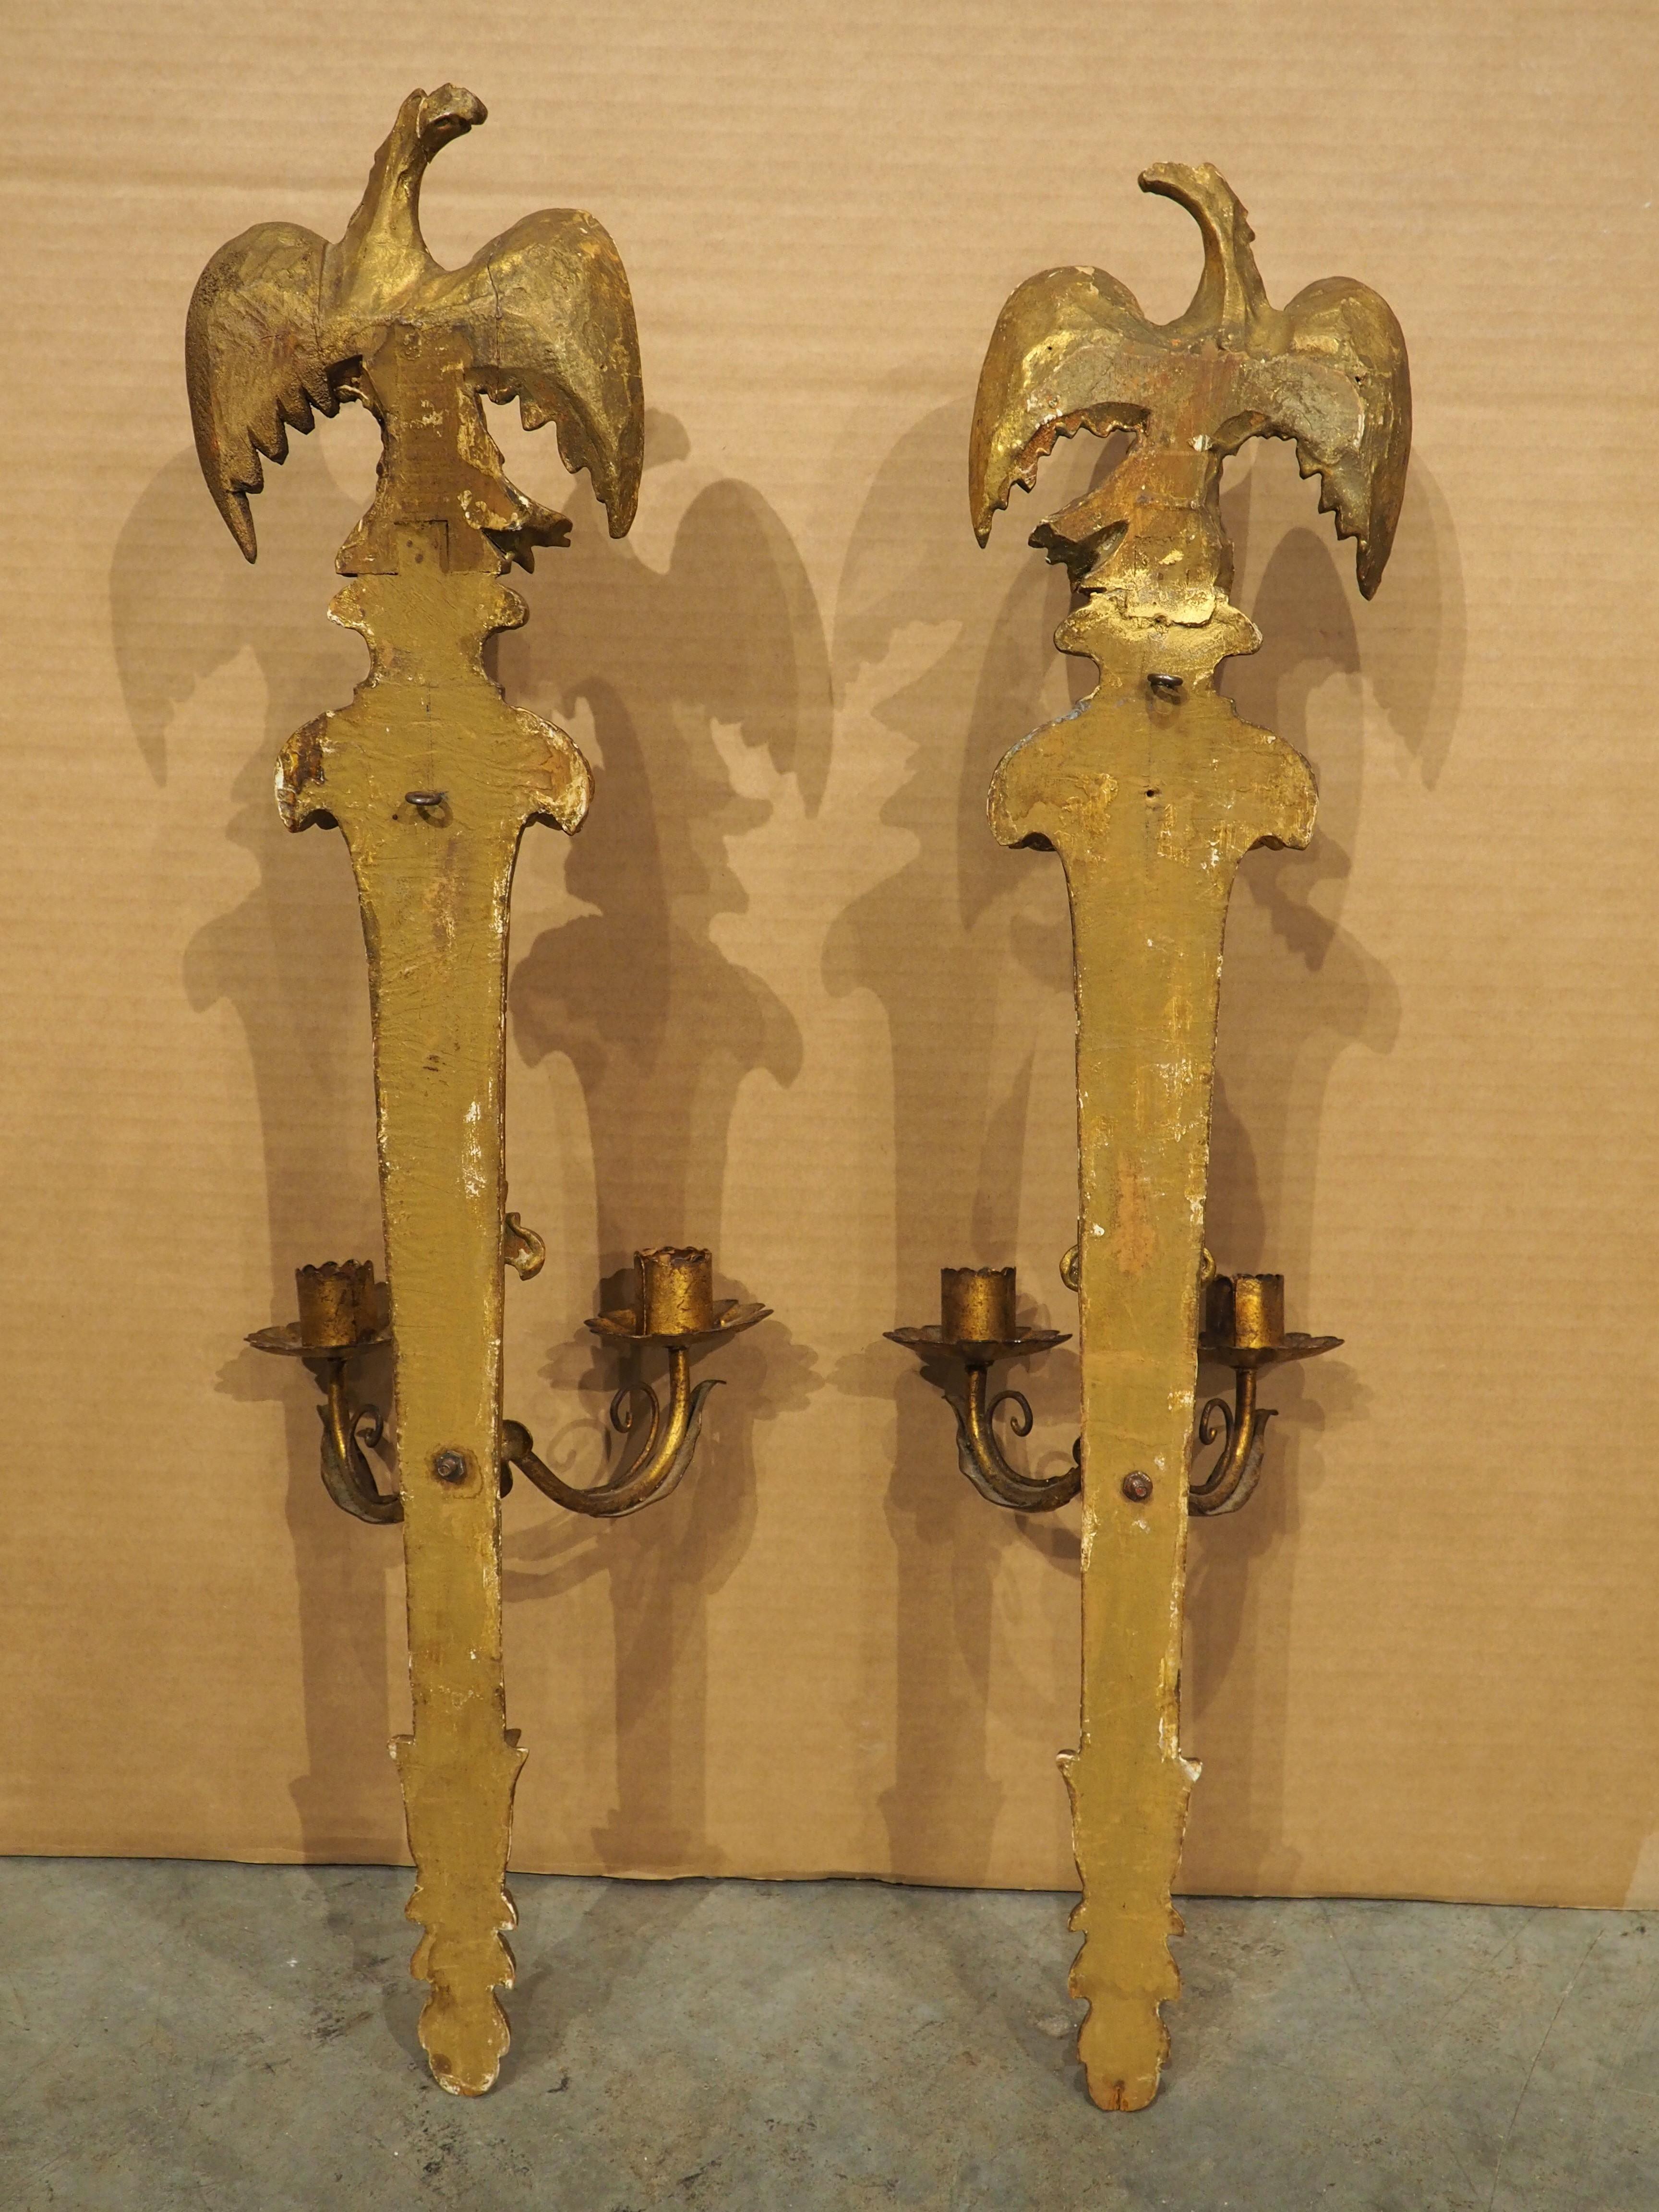 Pair of French Empire Period Giltwood Eagle Sconces, Circa 1815 For Sale 9